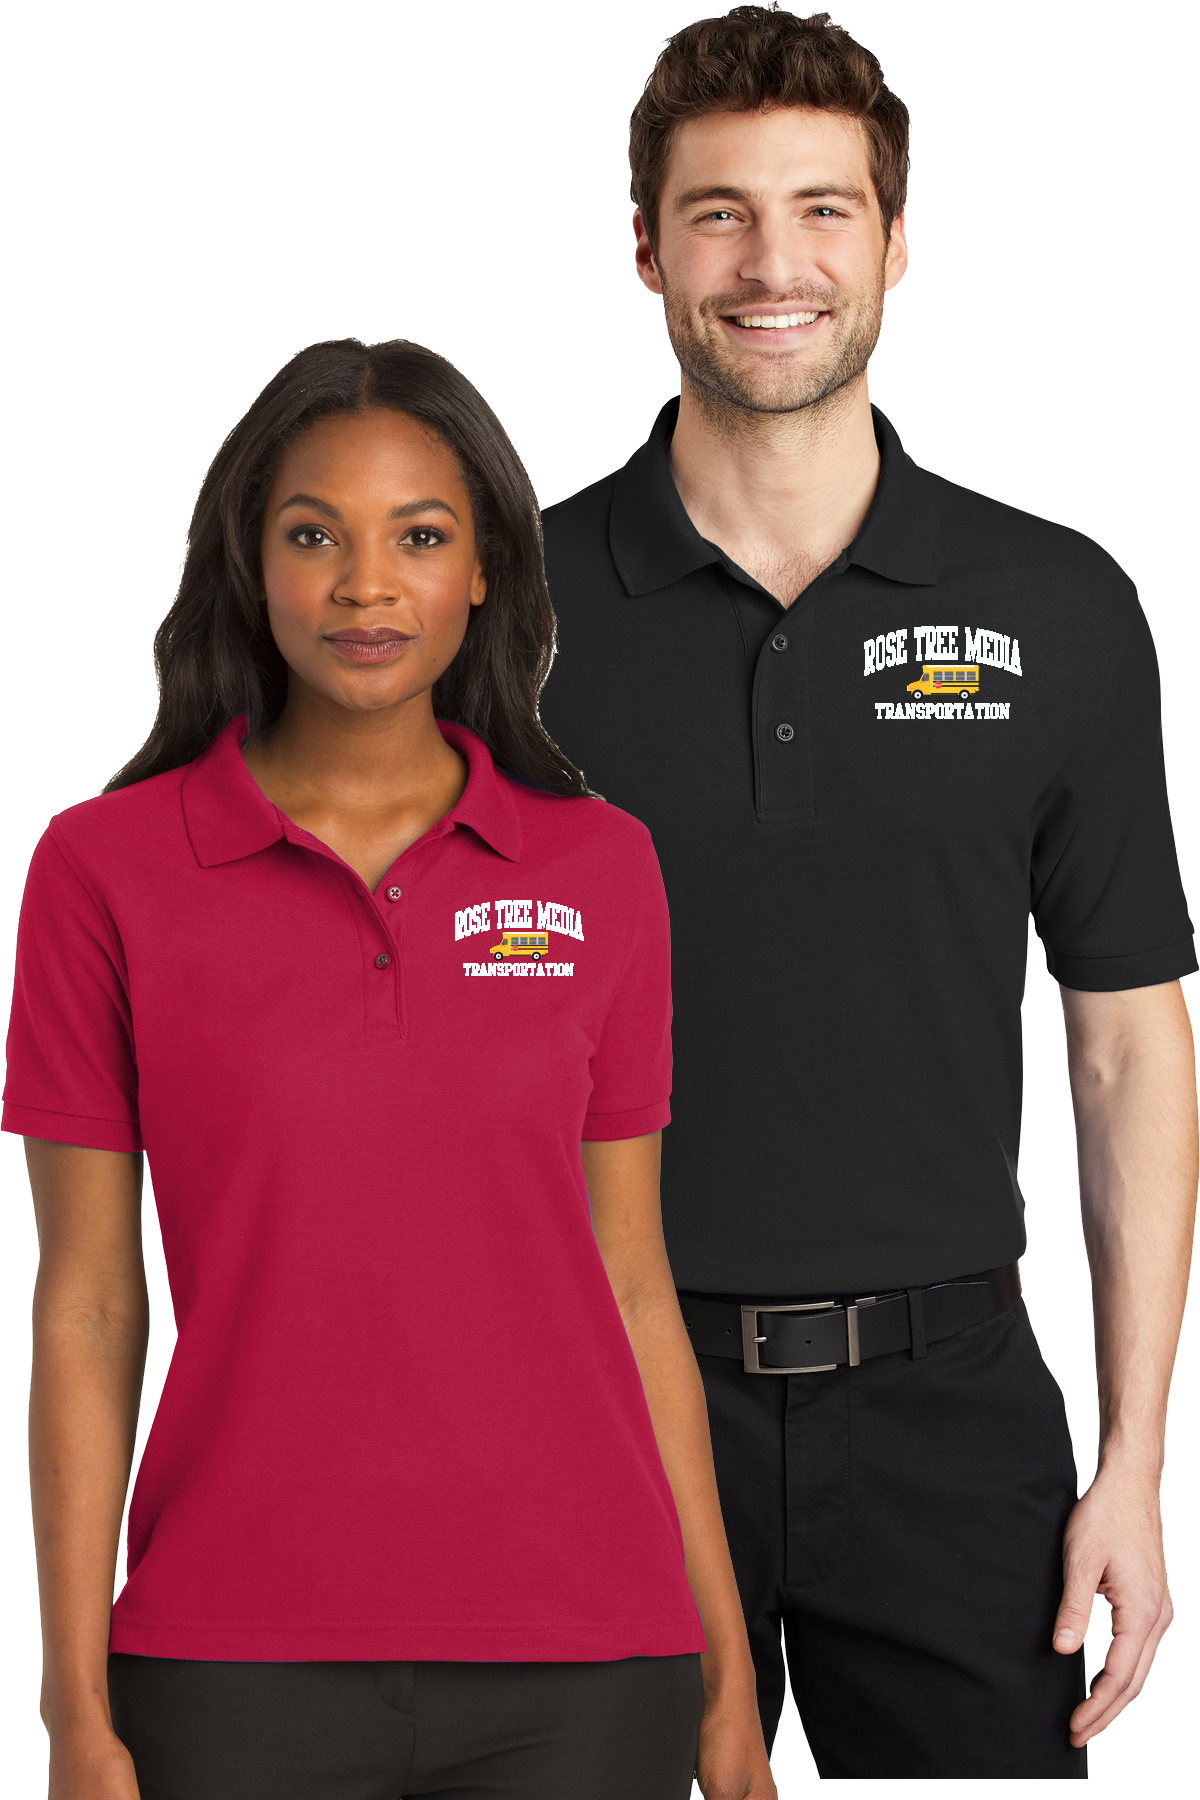 RTMT Women's and Men's Short Sleeve Polo